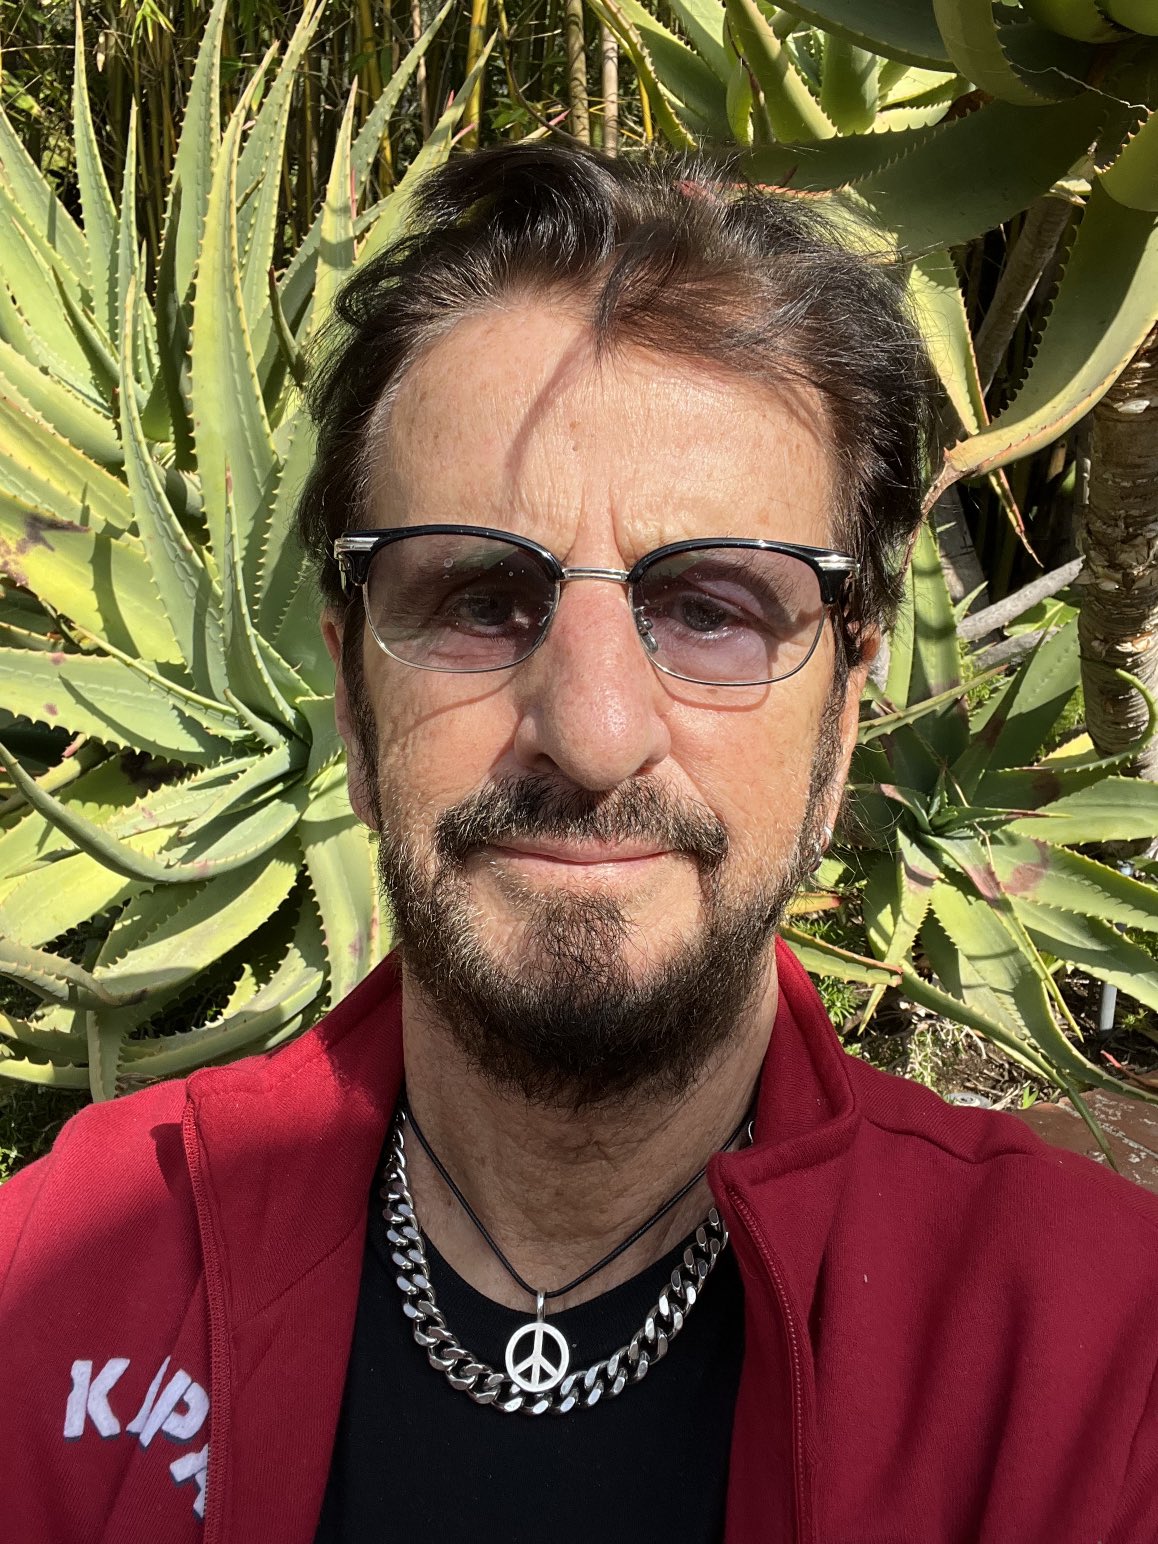 Ringostarr I M Sure You Ll Be As Surprised As I Was I Tested Positive Again For Covid The Rest Of The Tour Is Off I Send You Peace And Love Ringo